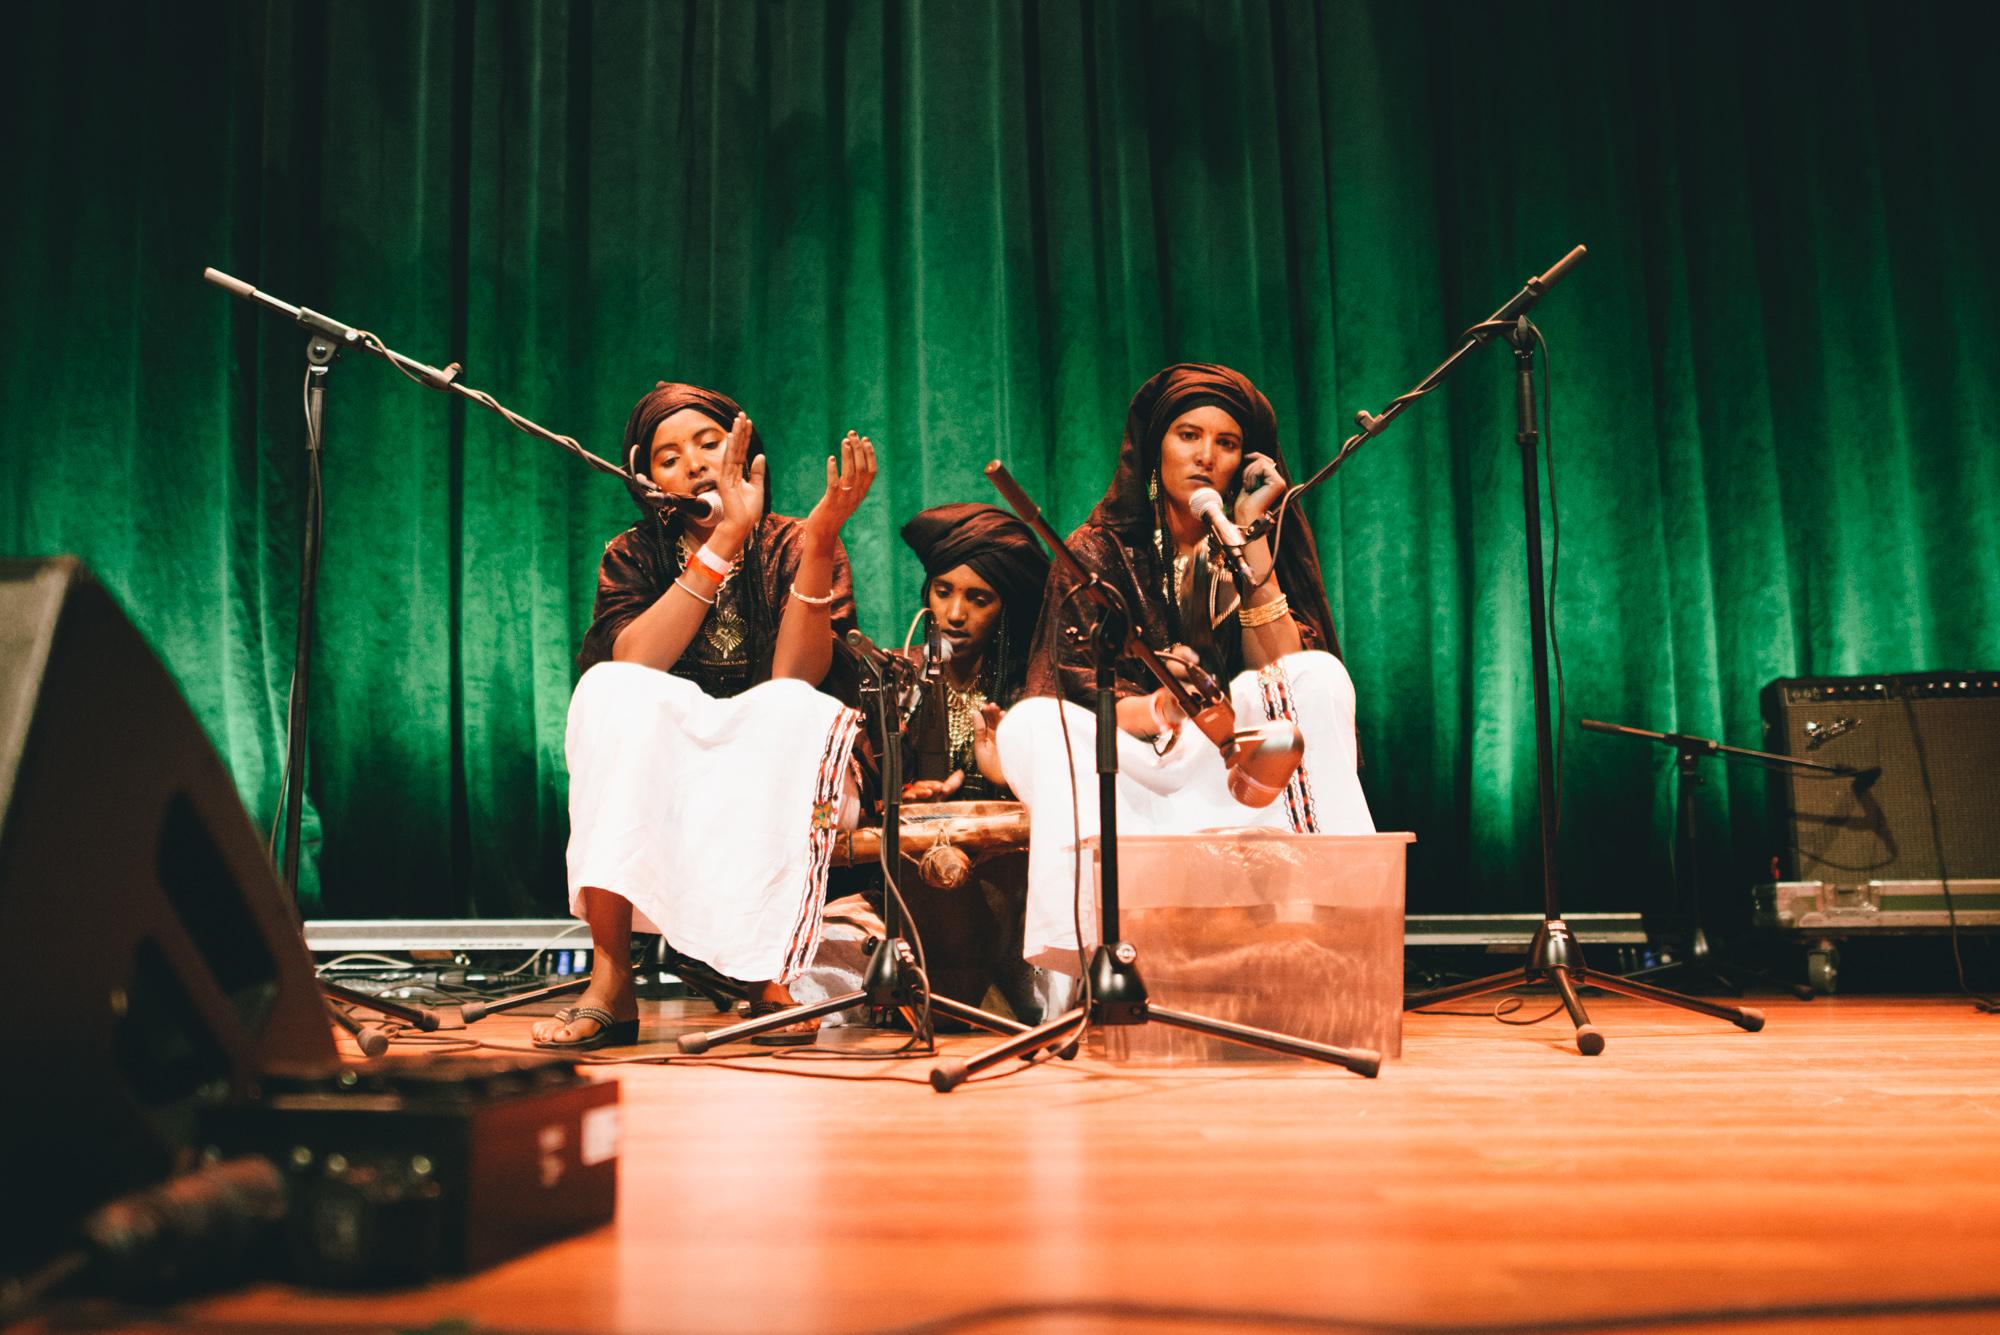 Listen: Pan African Music premieres the recordings of Les Filles de Illighadad at Le Guess Who? 2016